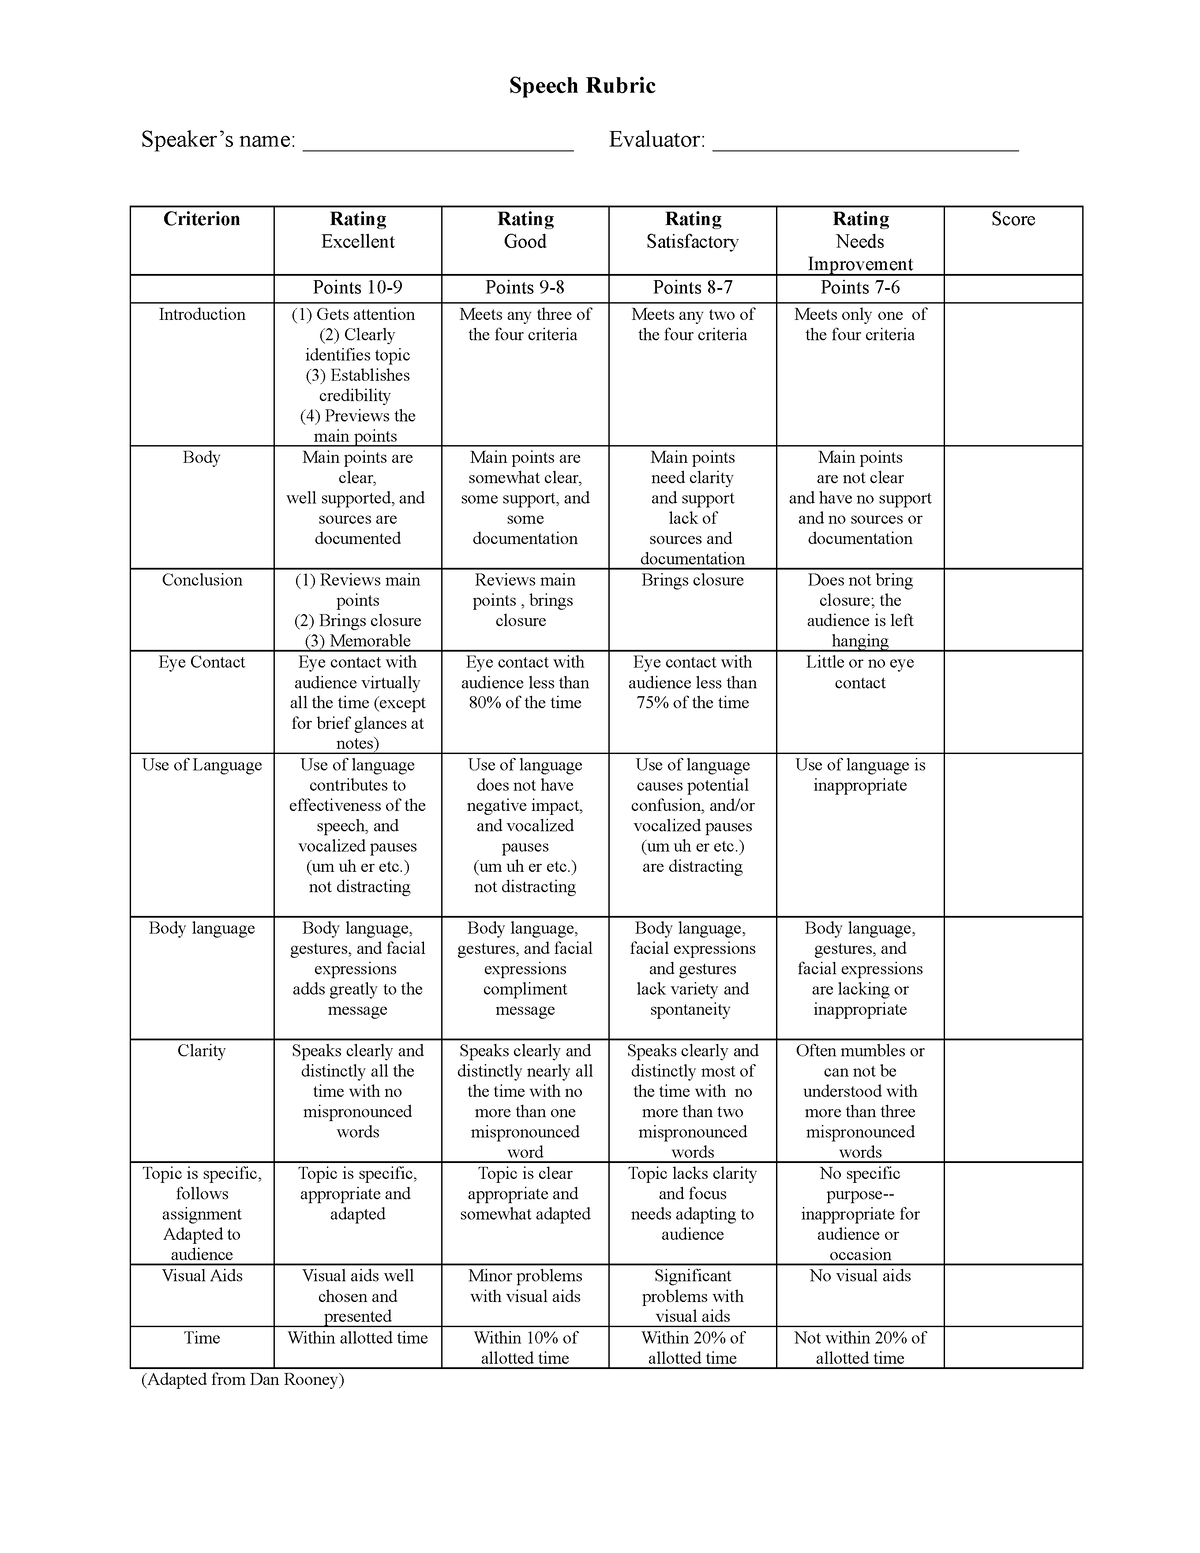 Speech Rubric Revised - Helping others - Speech Rubric Speaker’s name